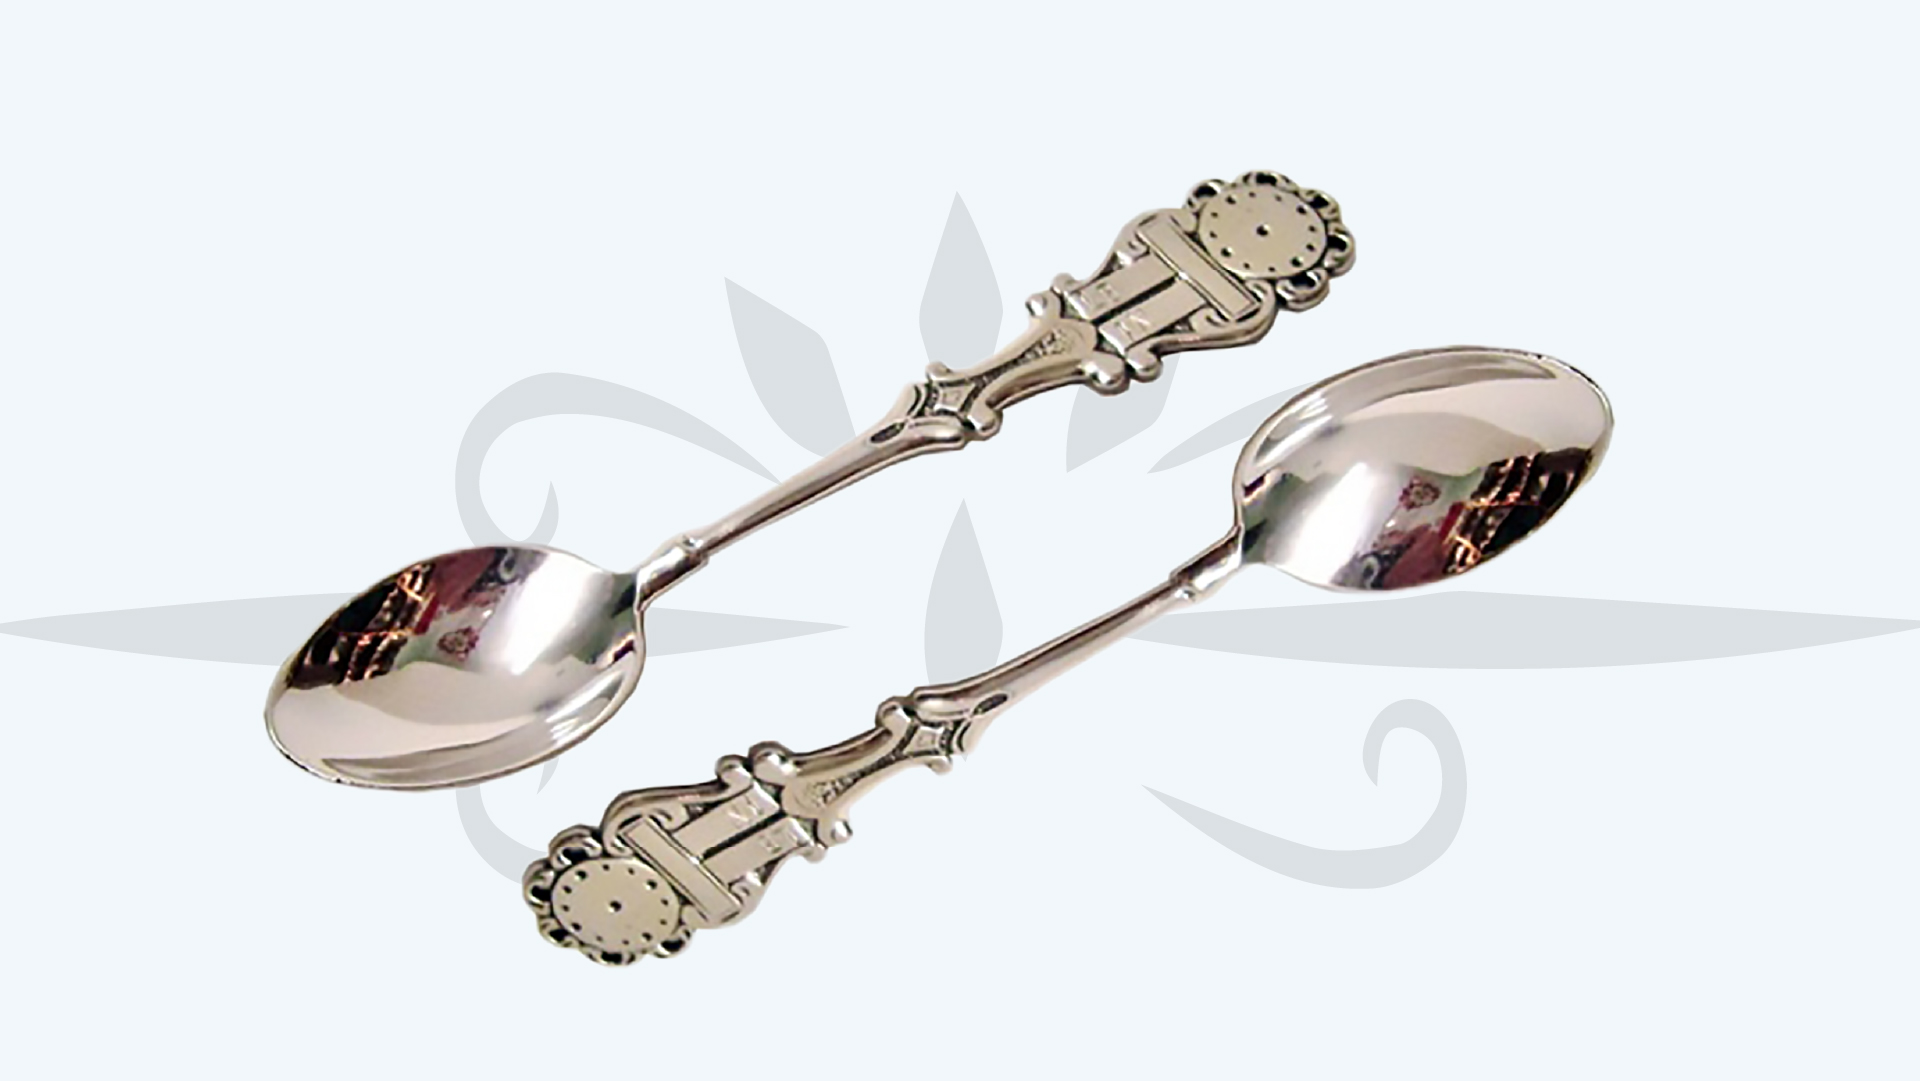 https://antiquesilver.org/wp-content/uploads/2023/04/Antique-Silver-Spoons.jpg